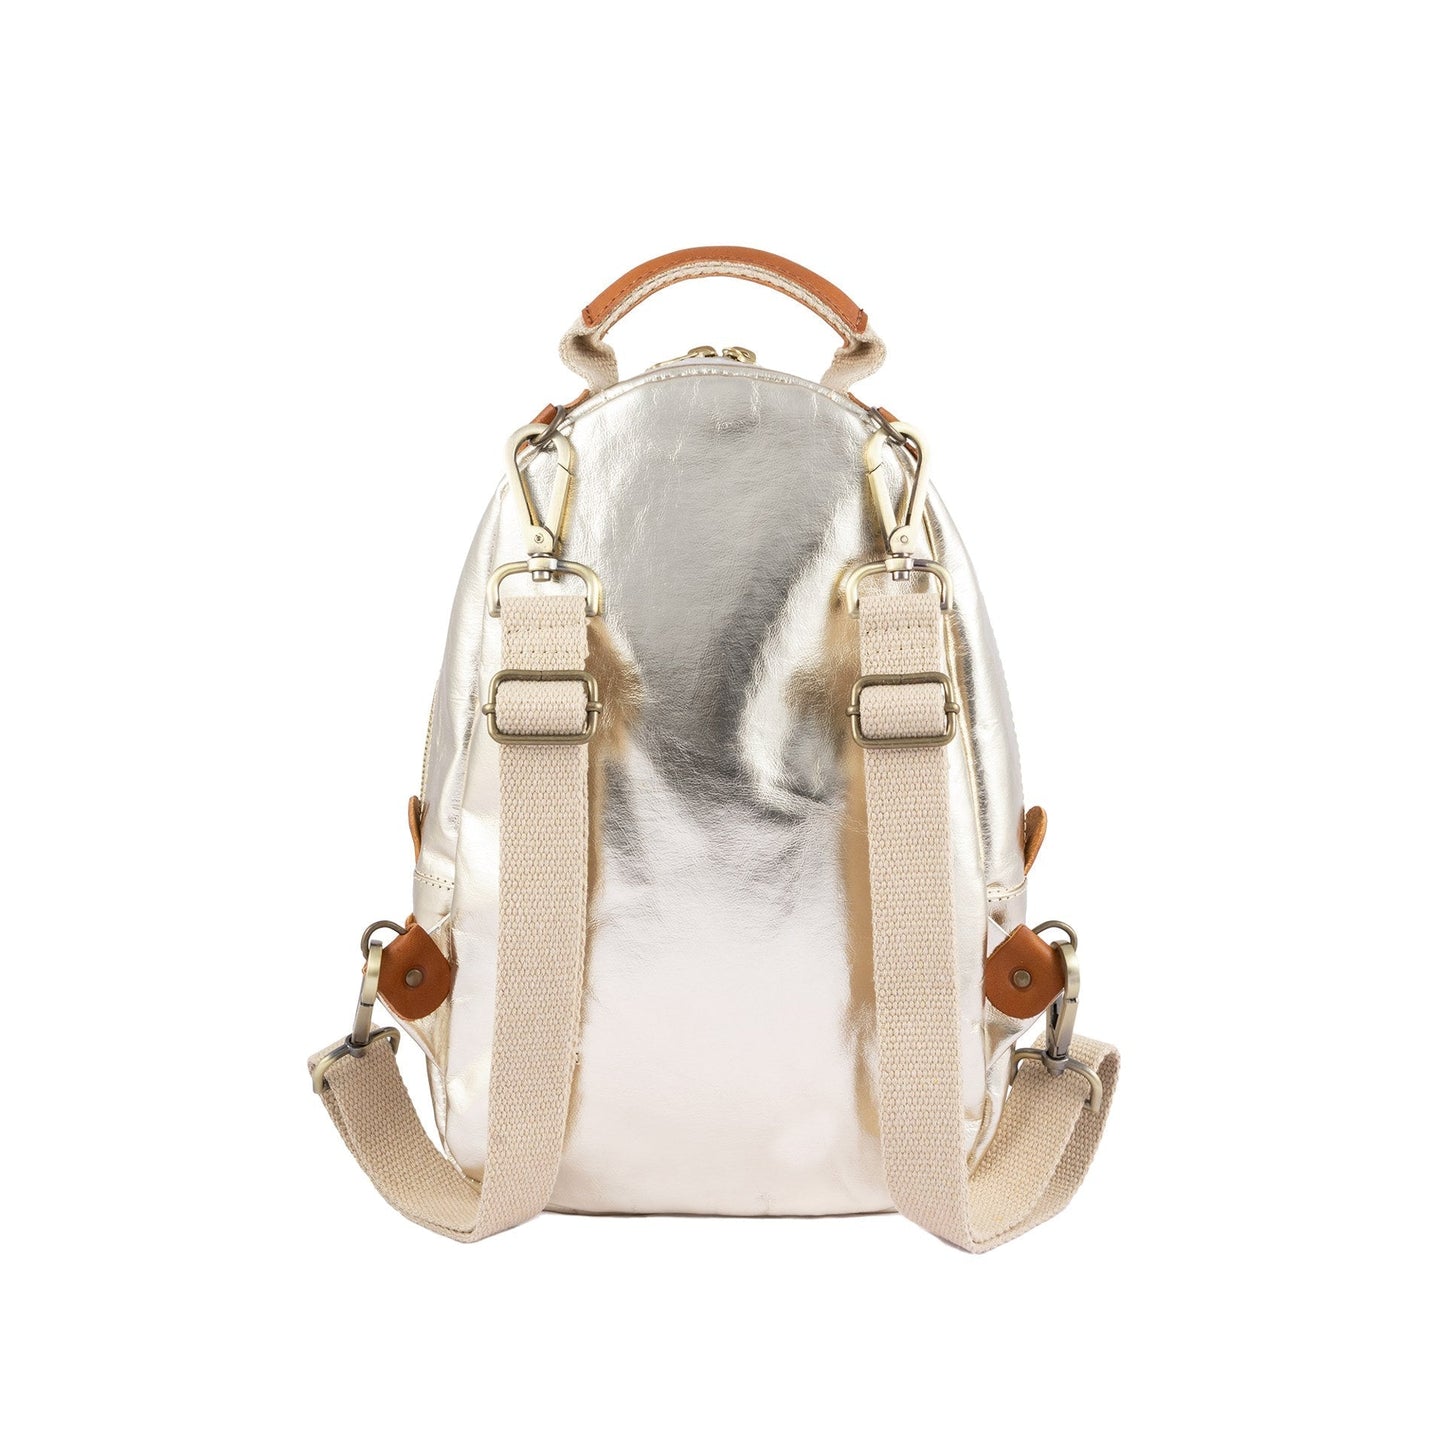 A metallic silver washable paper backpack is shown from the back. It features a rounded shape, a tan and canvas top handle, and canvas adjustable shoulder straps. 